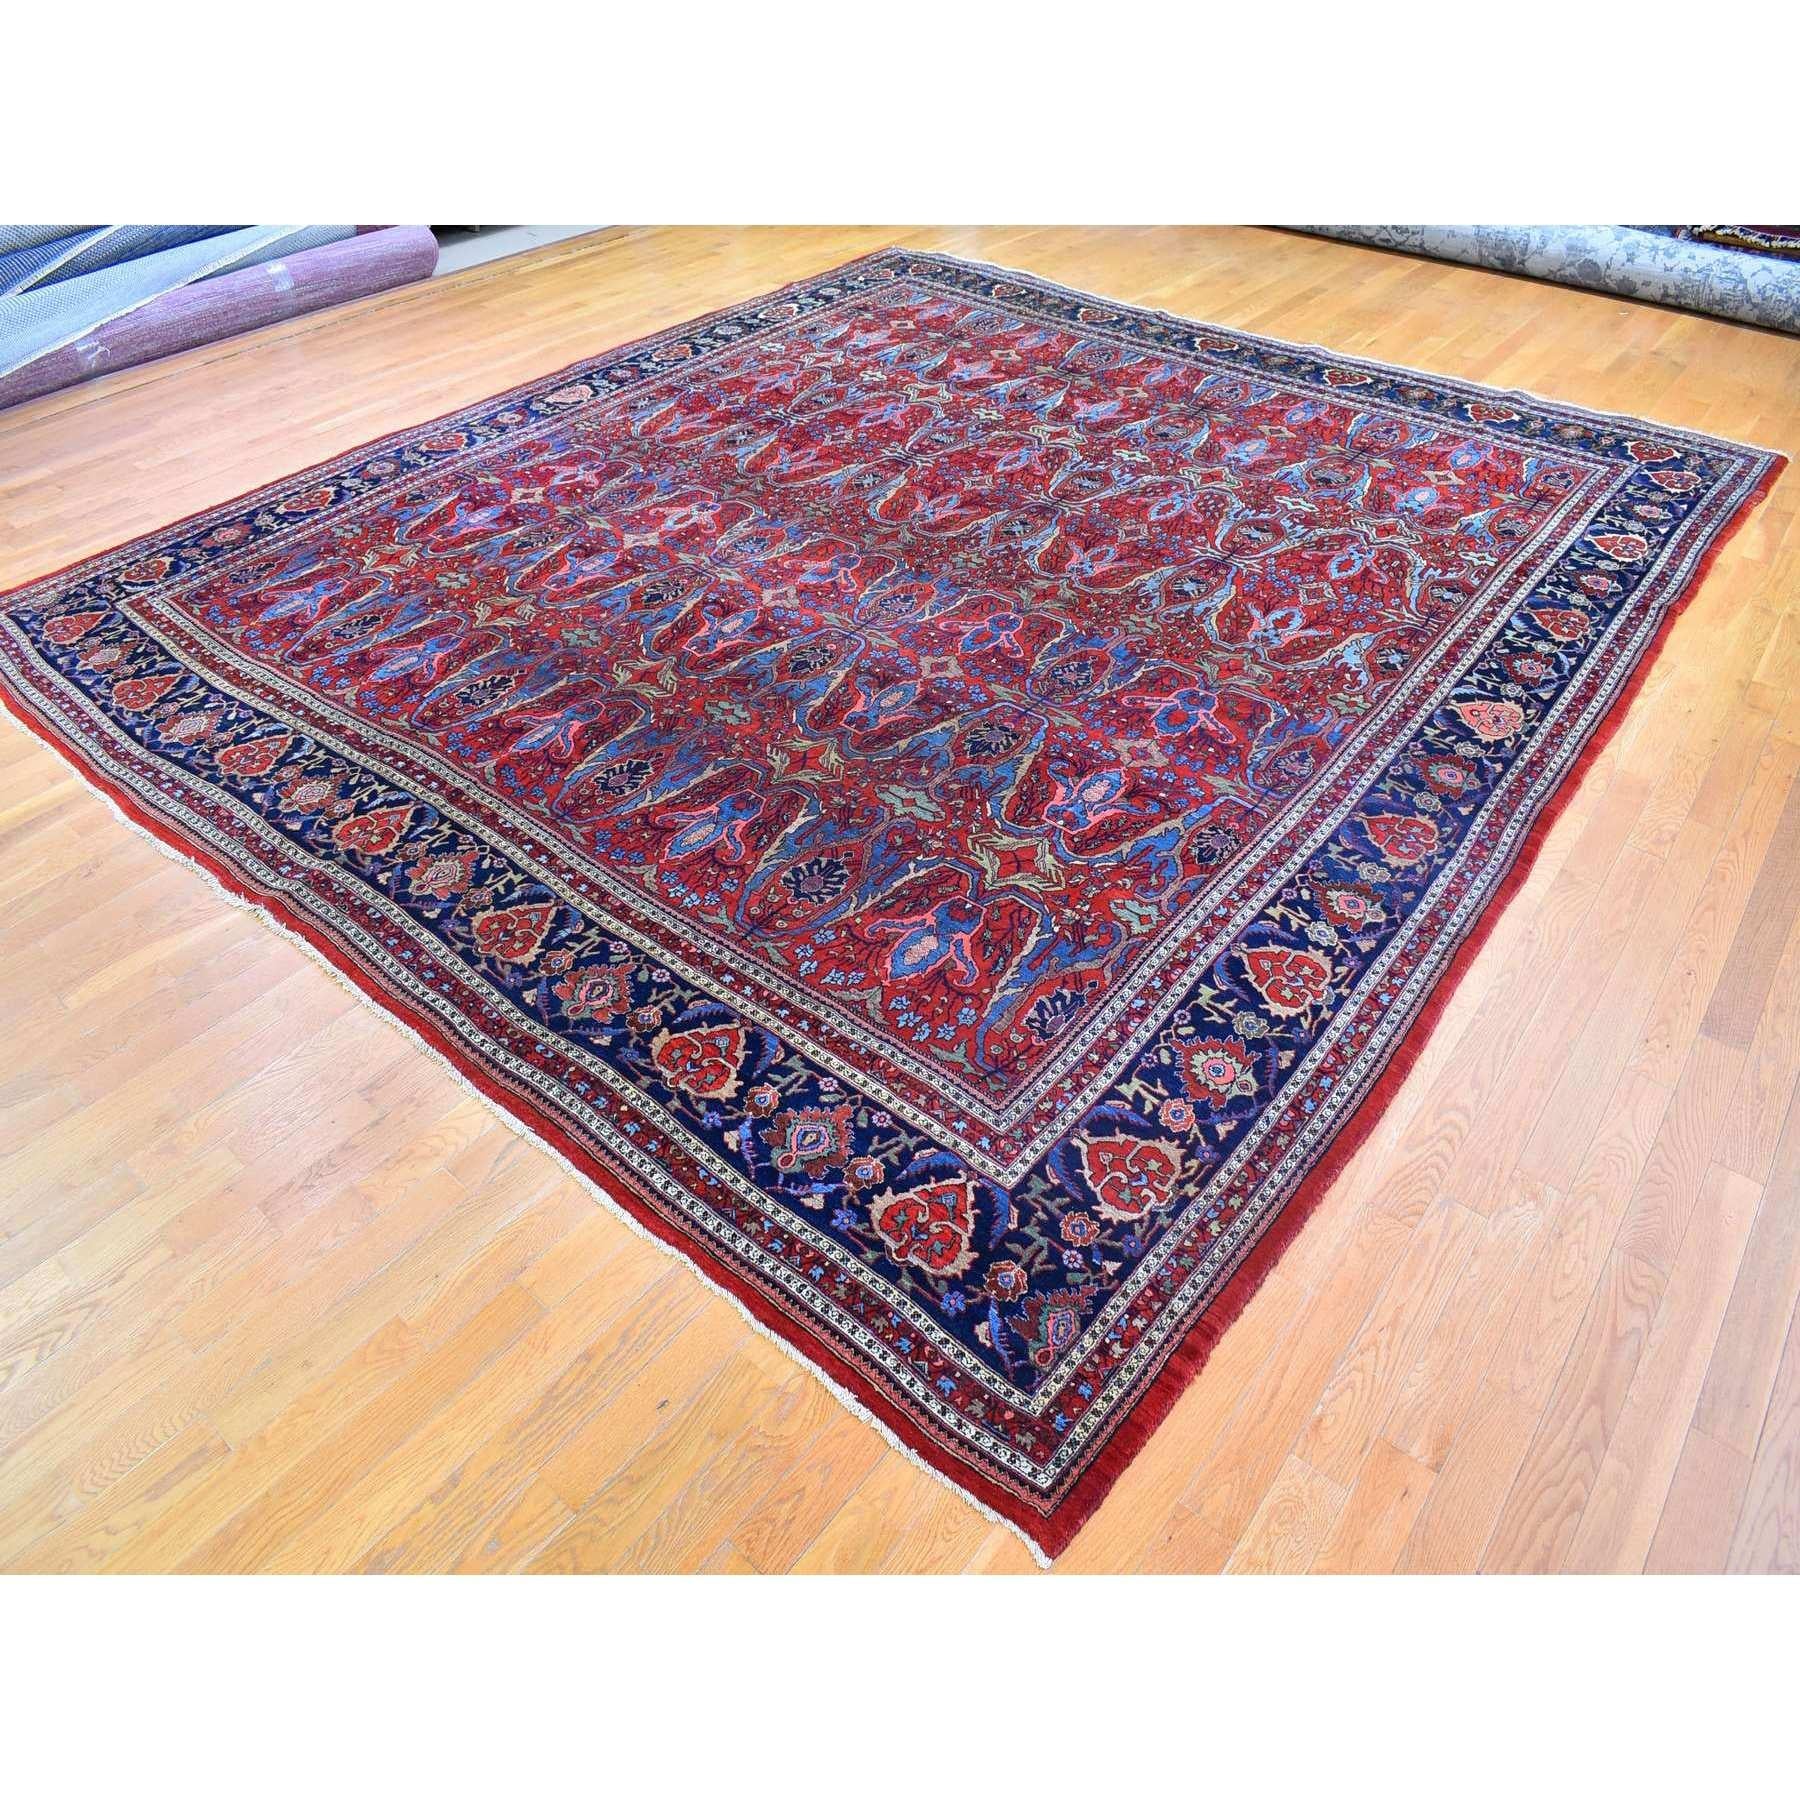 Medieval Red Antique Persian Bijar XL All Over Garus Design Full Pile Pure Wool Rug For Sale